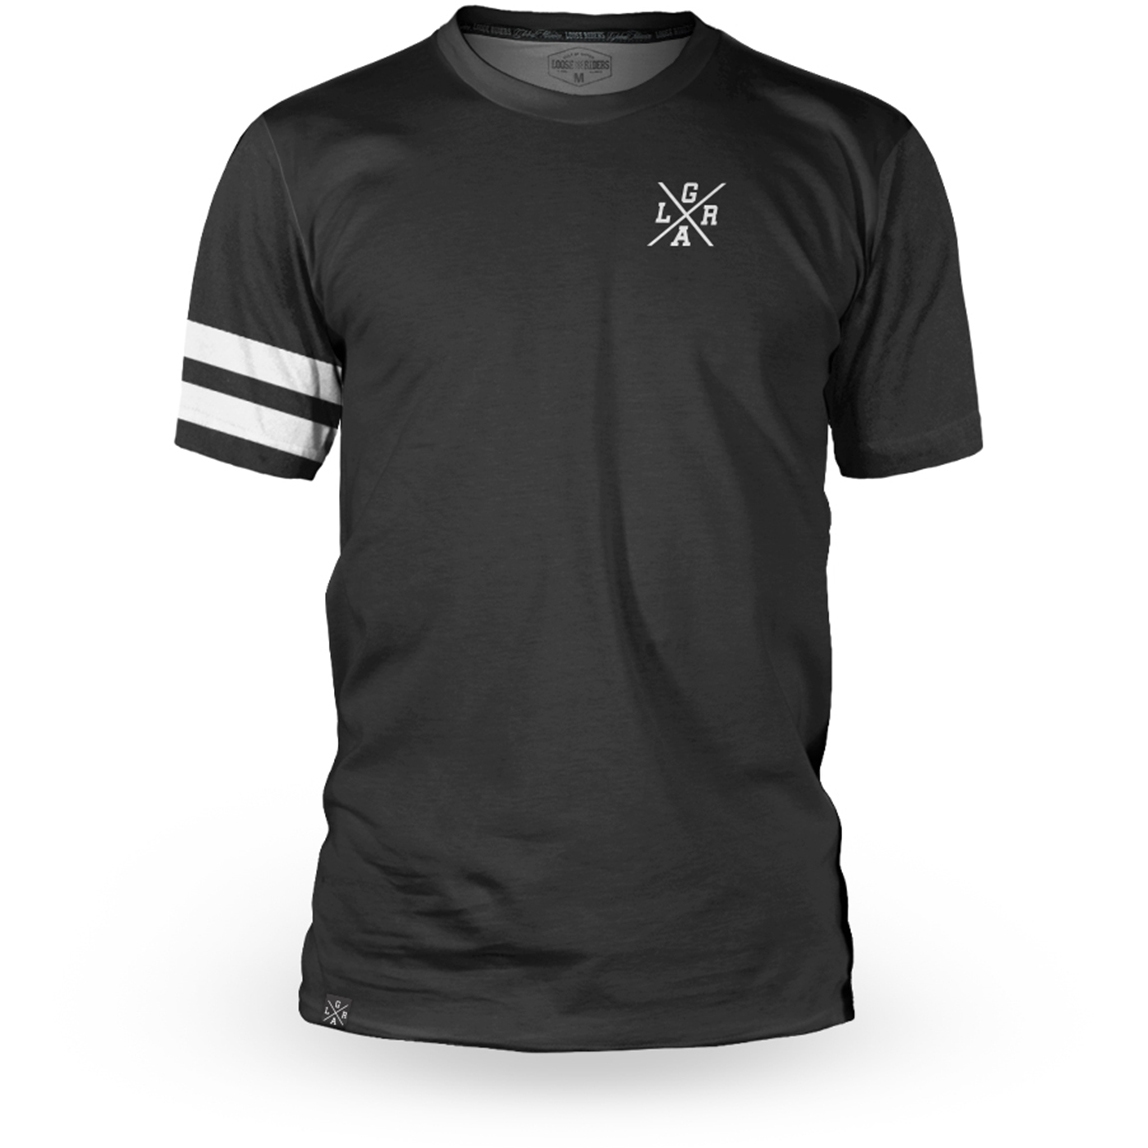 Image of Loose Riders Heritage Technical Short Sleeve Jersey - Black